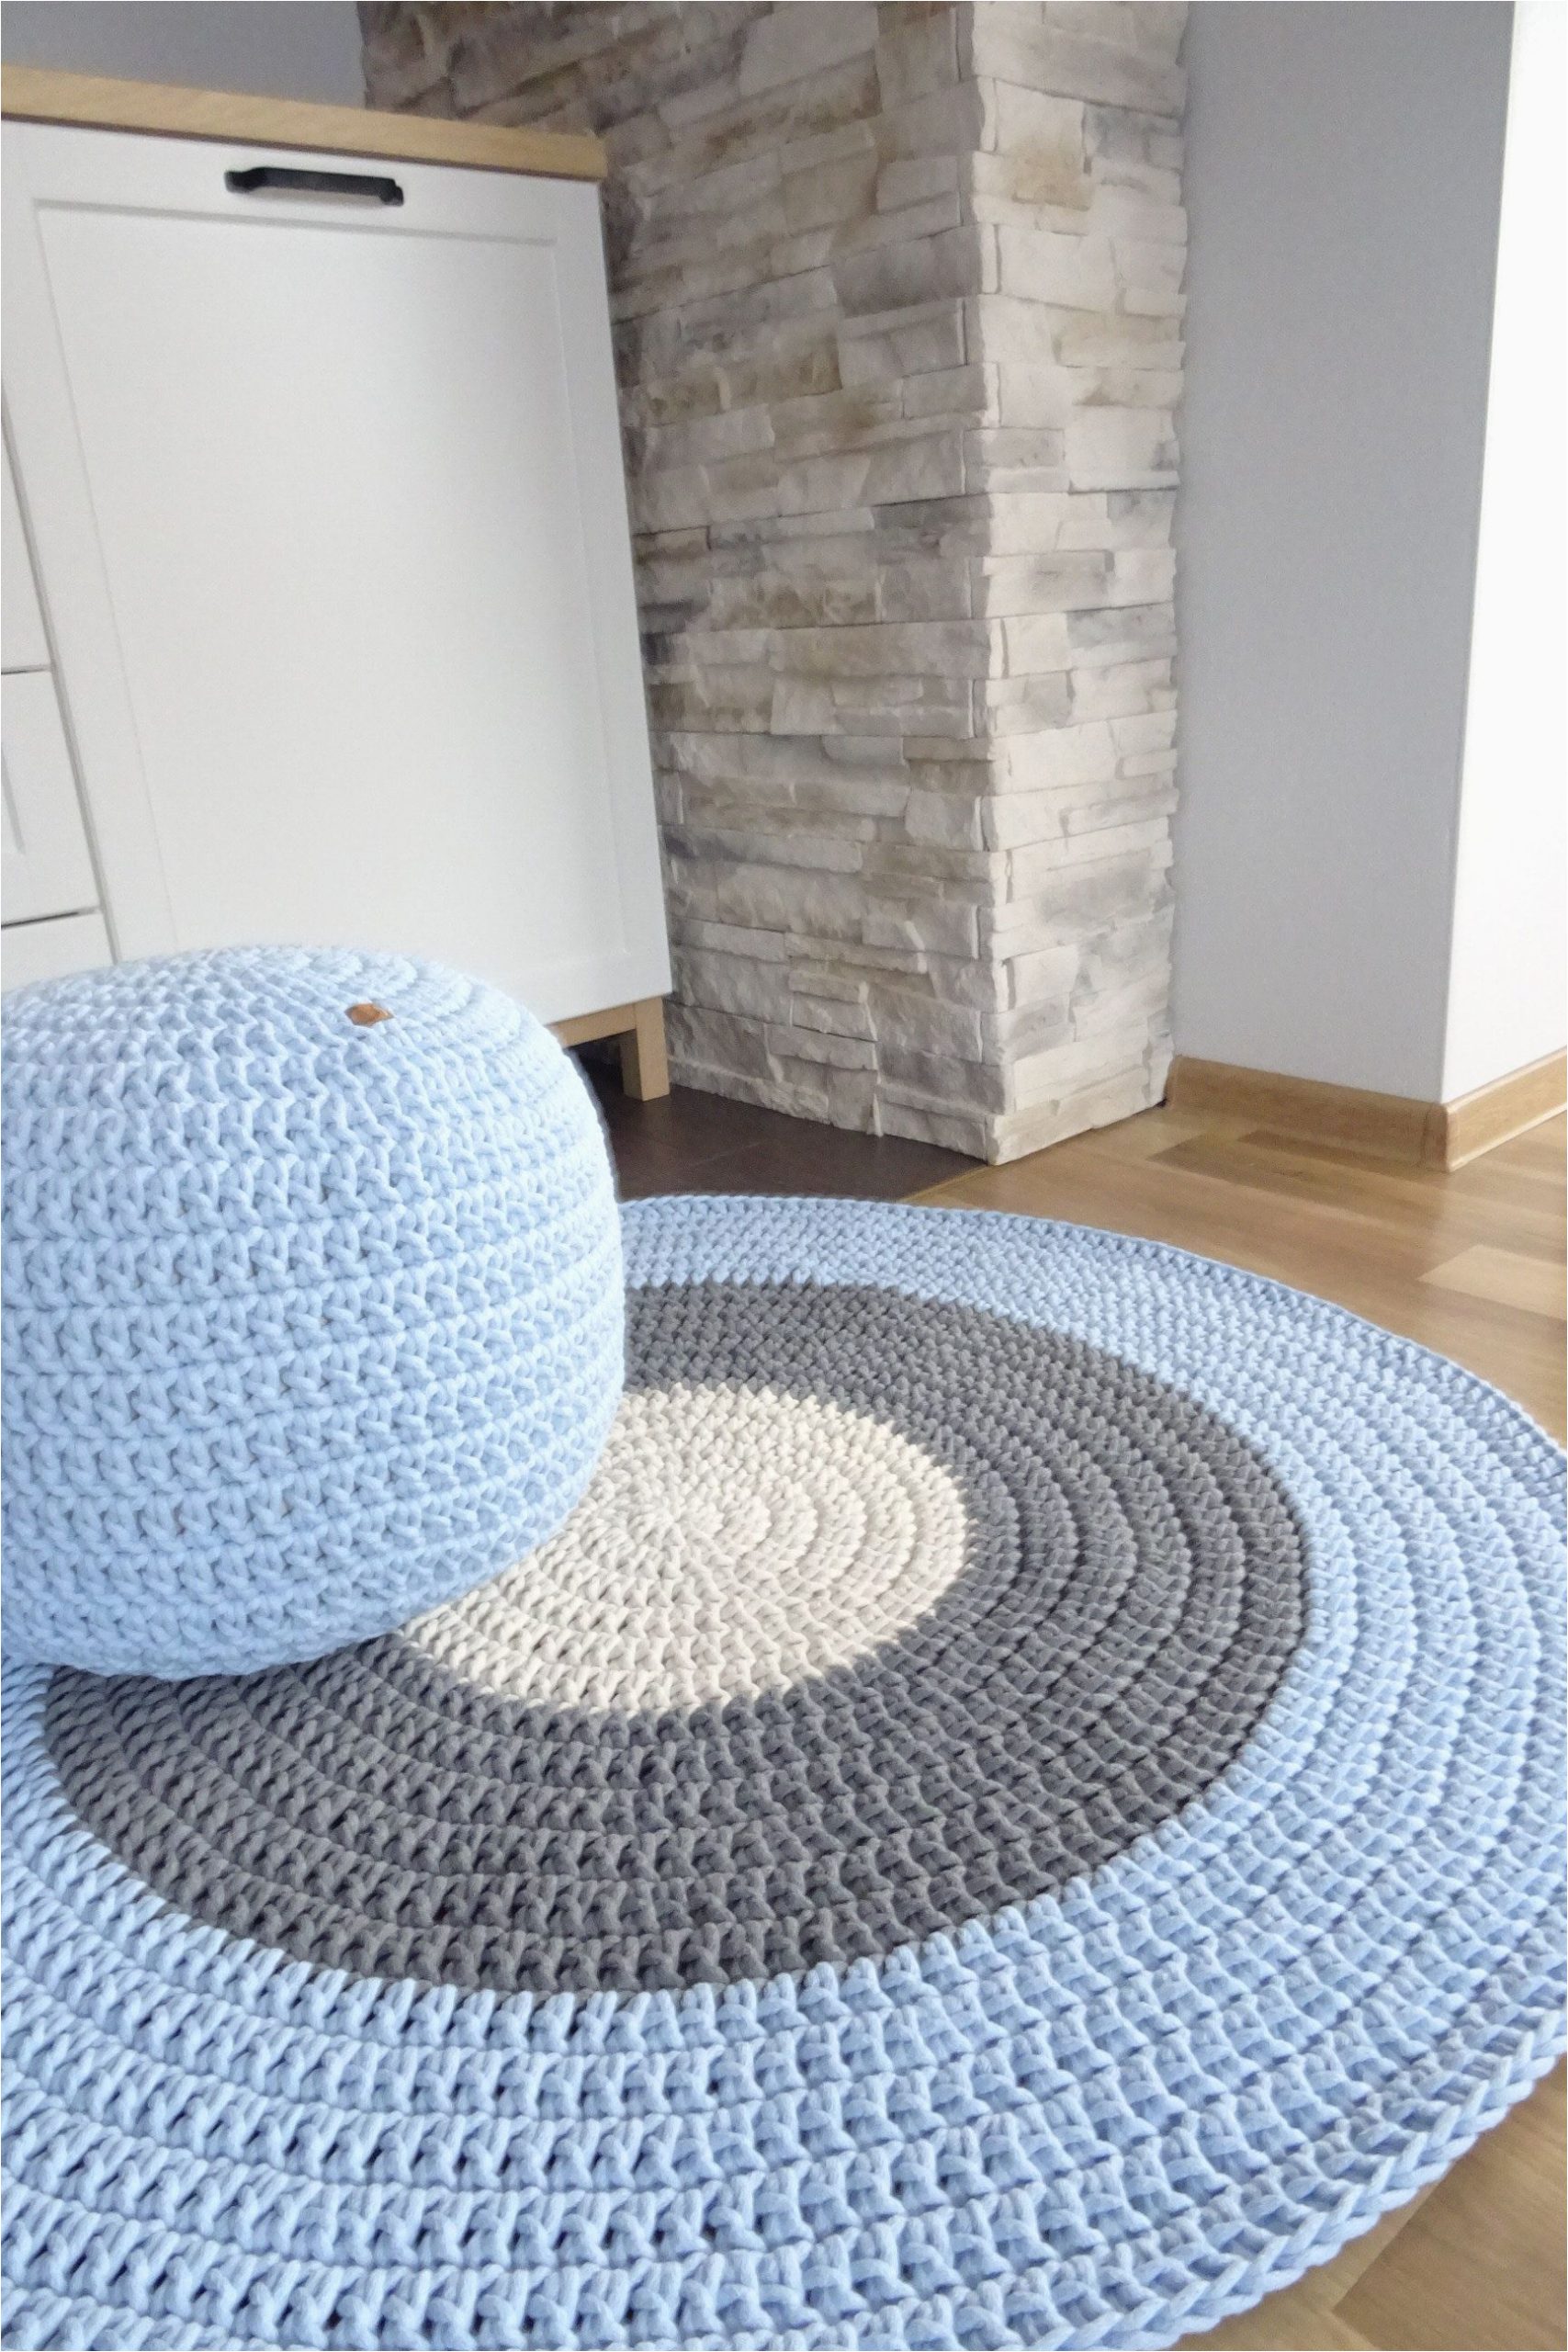 Small Round Blue Rug Round Blue Rug Small Handmade Rug Round Blue Rug Cotton Rug – Etsy …